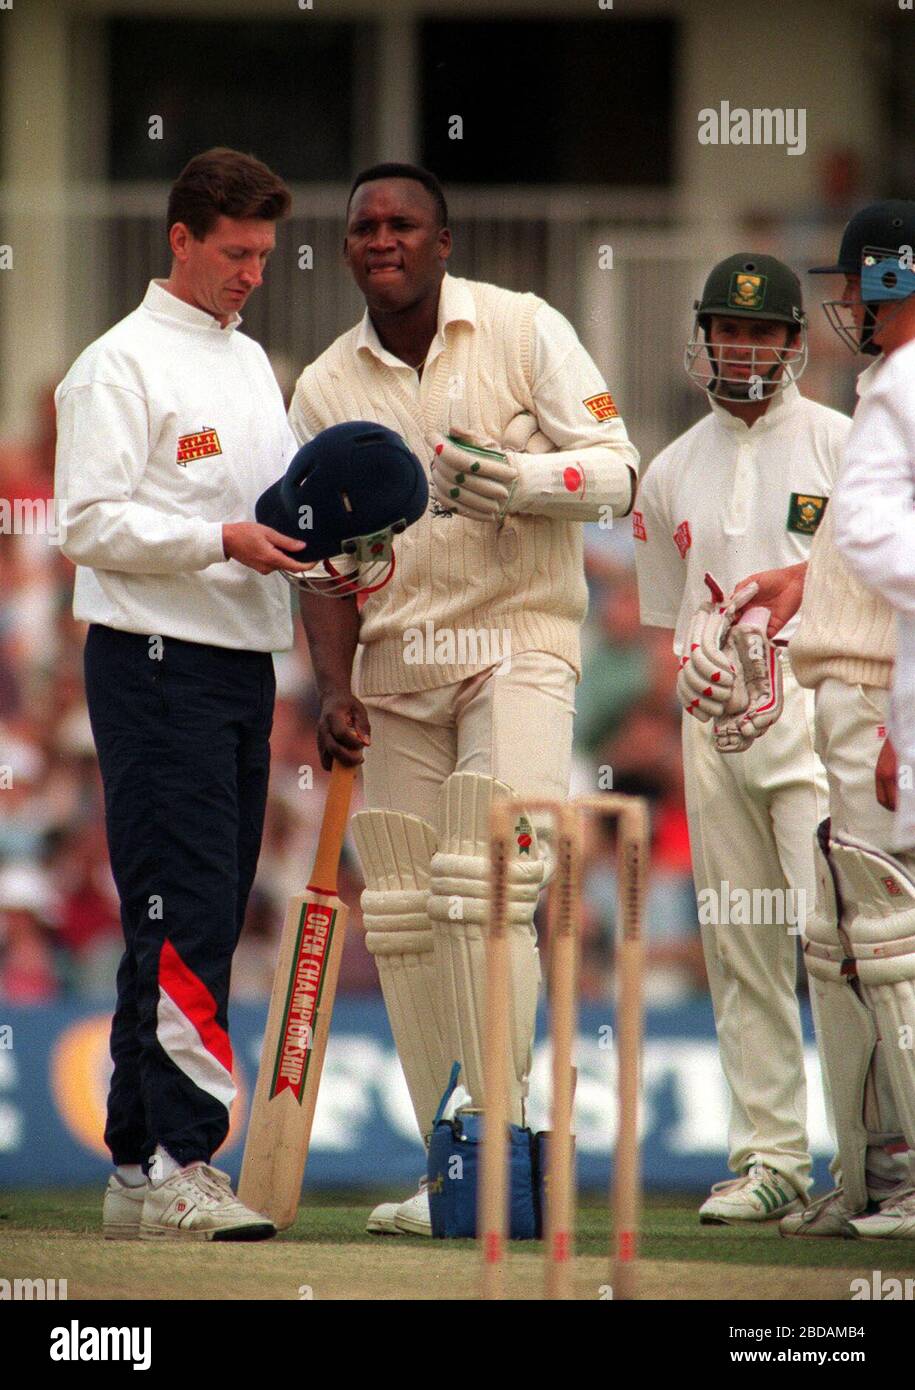 File photo dated 20-08-1994 of England v South Africa Test Match England's Devon Malcolm grimaces after receiving a blow on his protective helmet with a bouncer bowled by South Africa's Fanie De Villers. Stock Photo